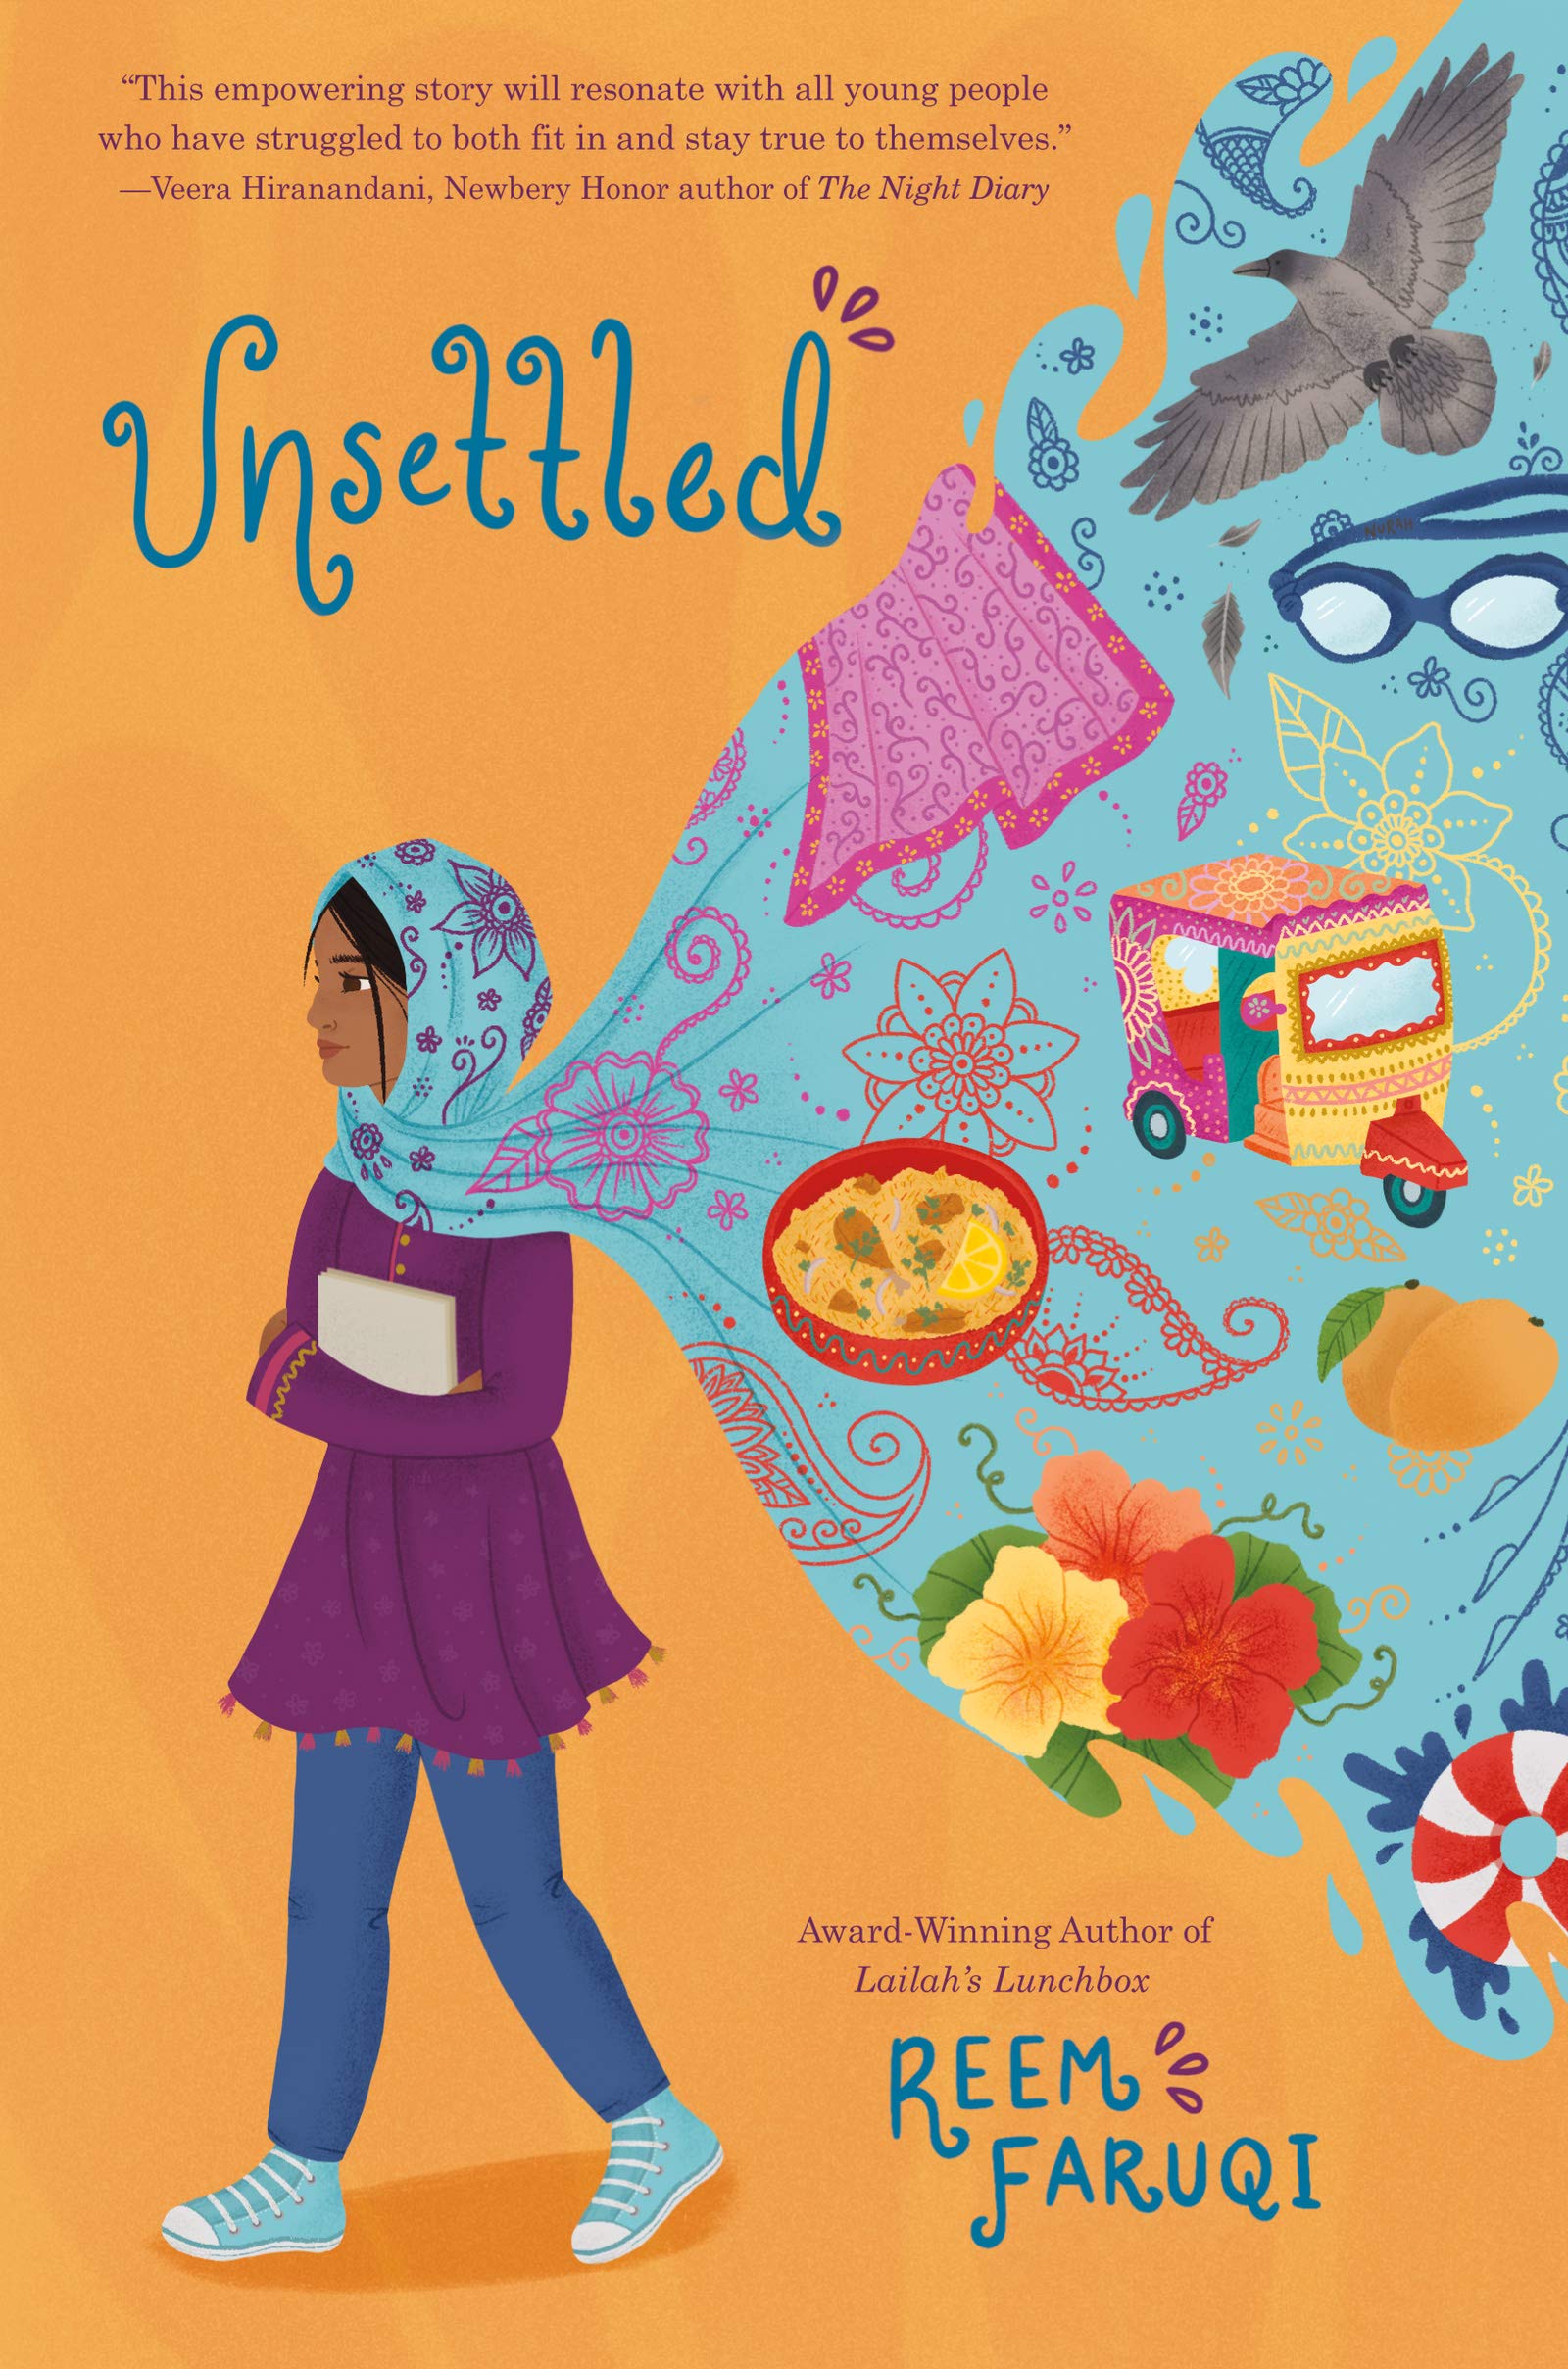 Image for "Unsettled"